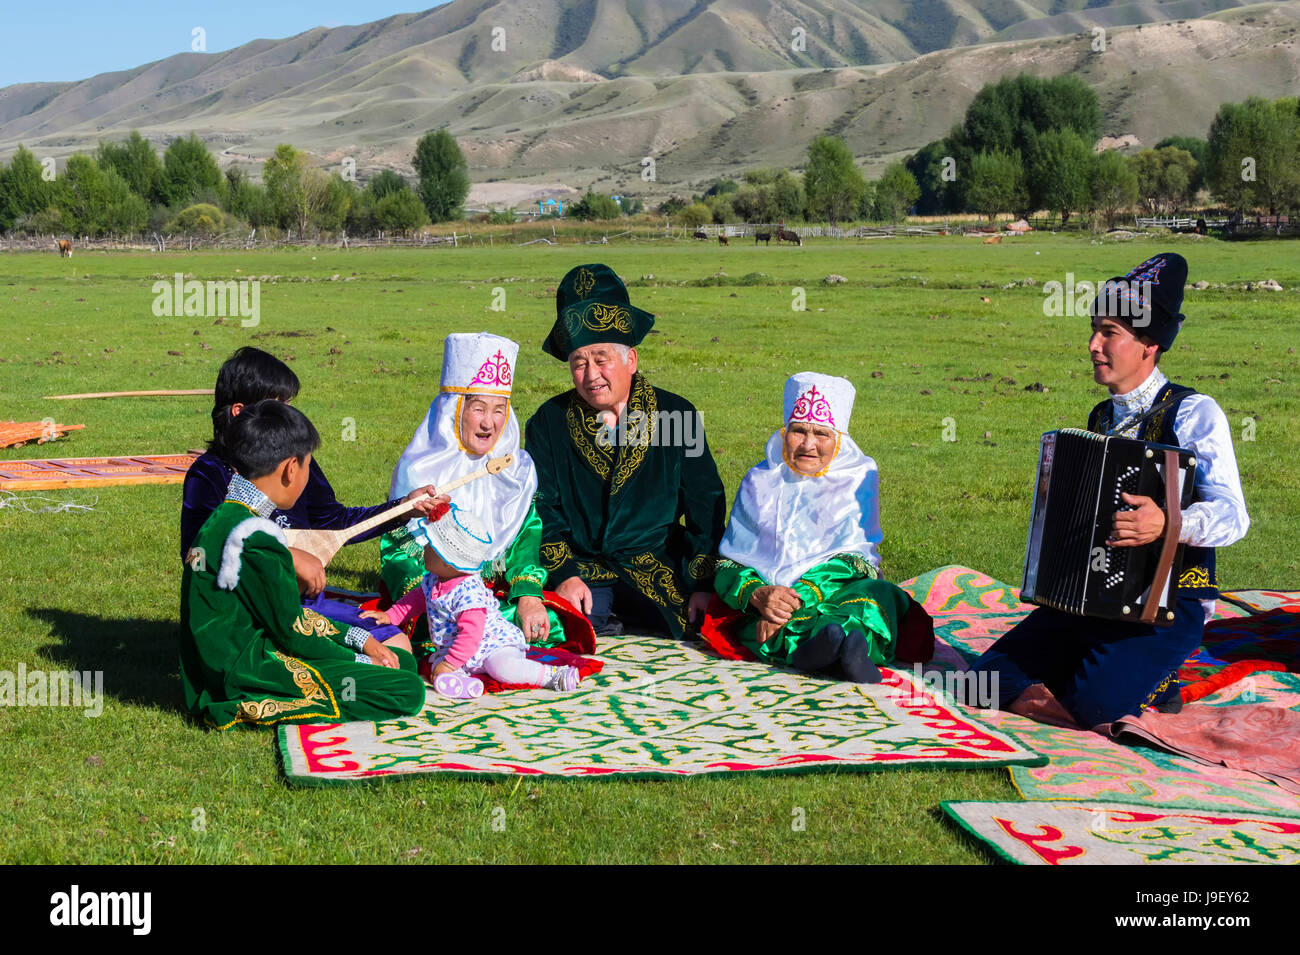 Kazakh family in traditional clothes listening to the music of an accordion player, For editorial Use only, Sati village, Tien Shan Mountains, Kazakhs Stock Photo